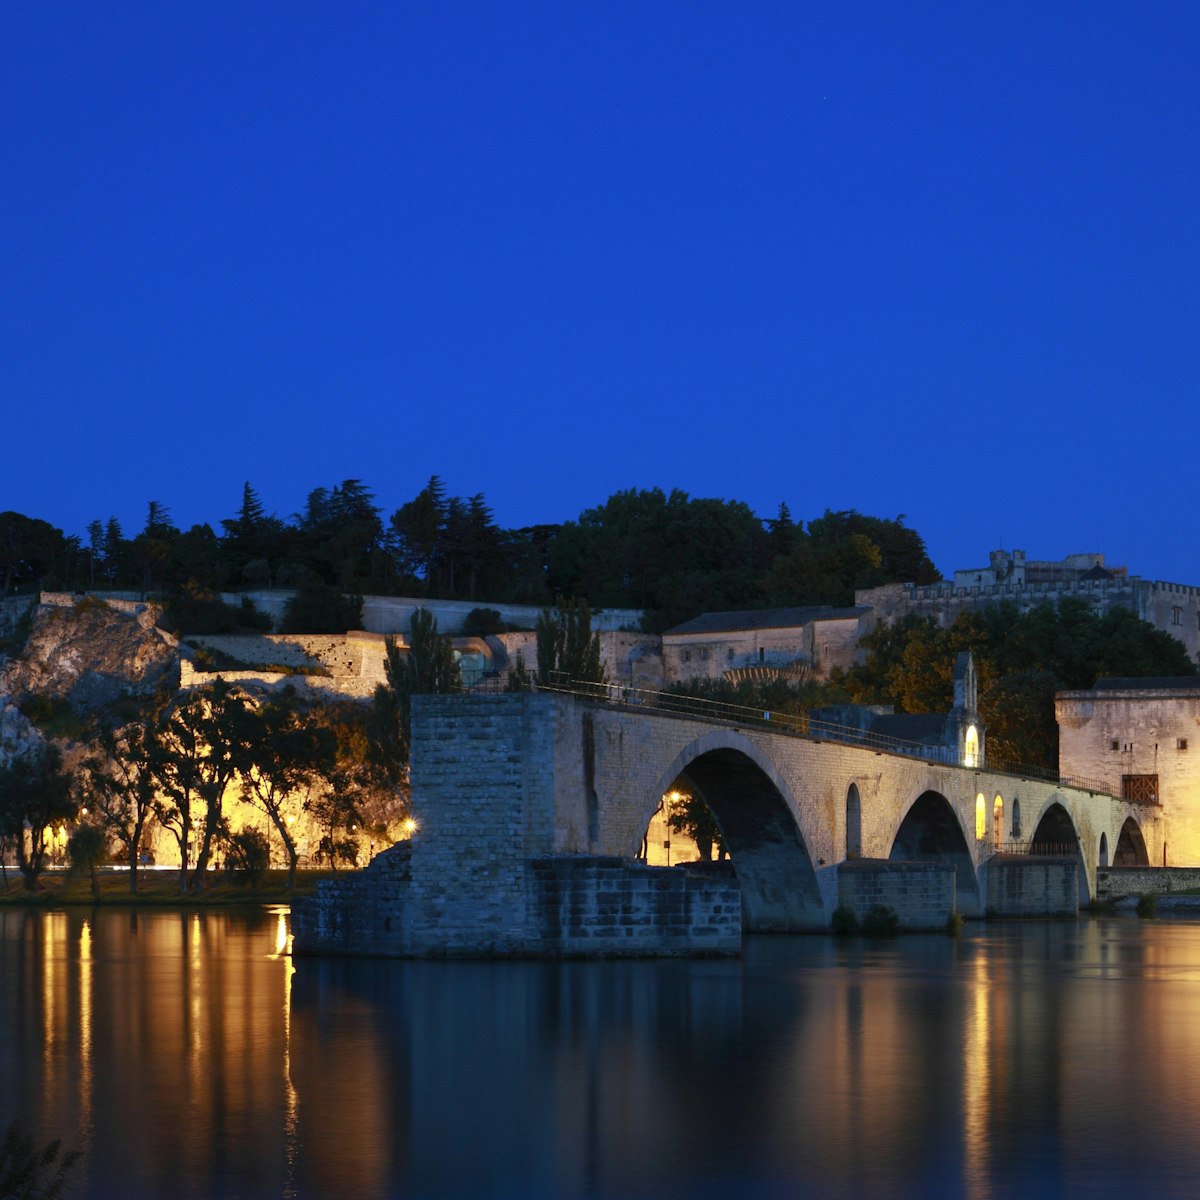 The Avignon Papal Palace (Palais des Papes) and the Avignon Bridge (Pont d'Avignon or Pont St-Bénézet) illuminated at night under the deep blue sky reflecting in the still waters of Rhone river. ; Shutterstock ID 609704714